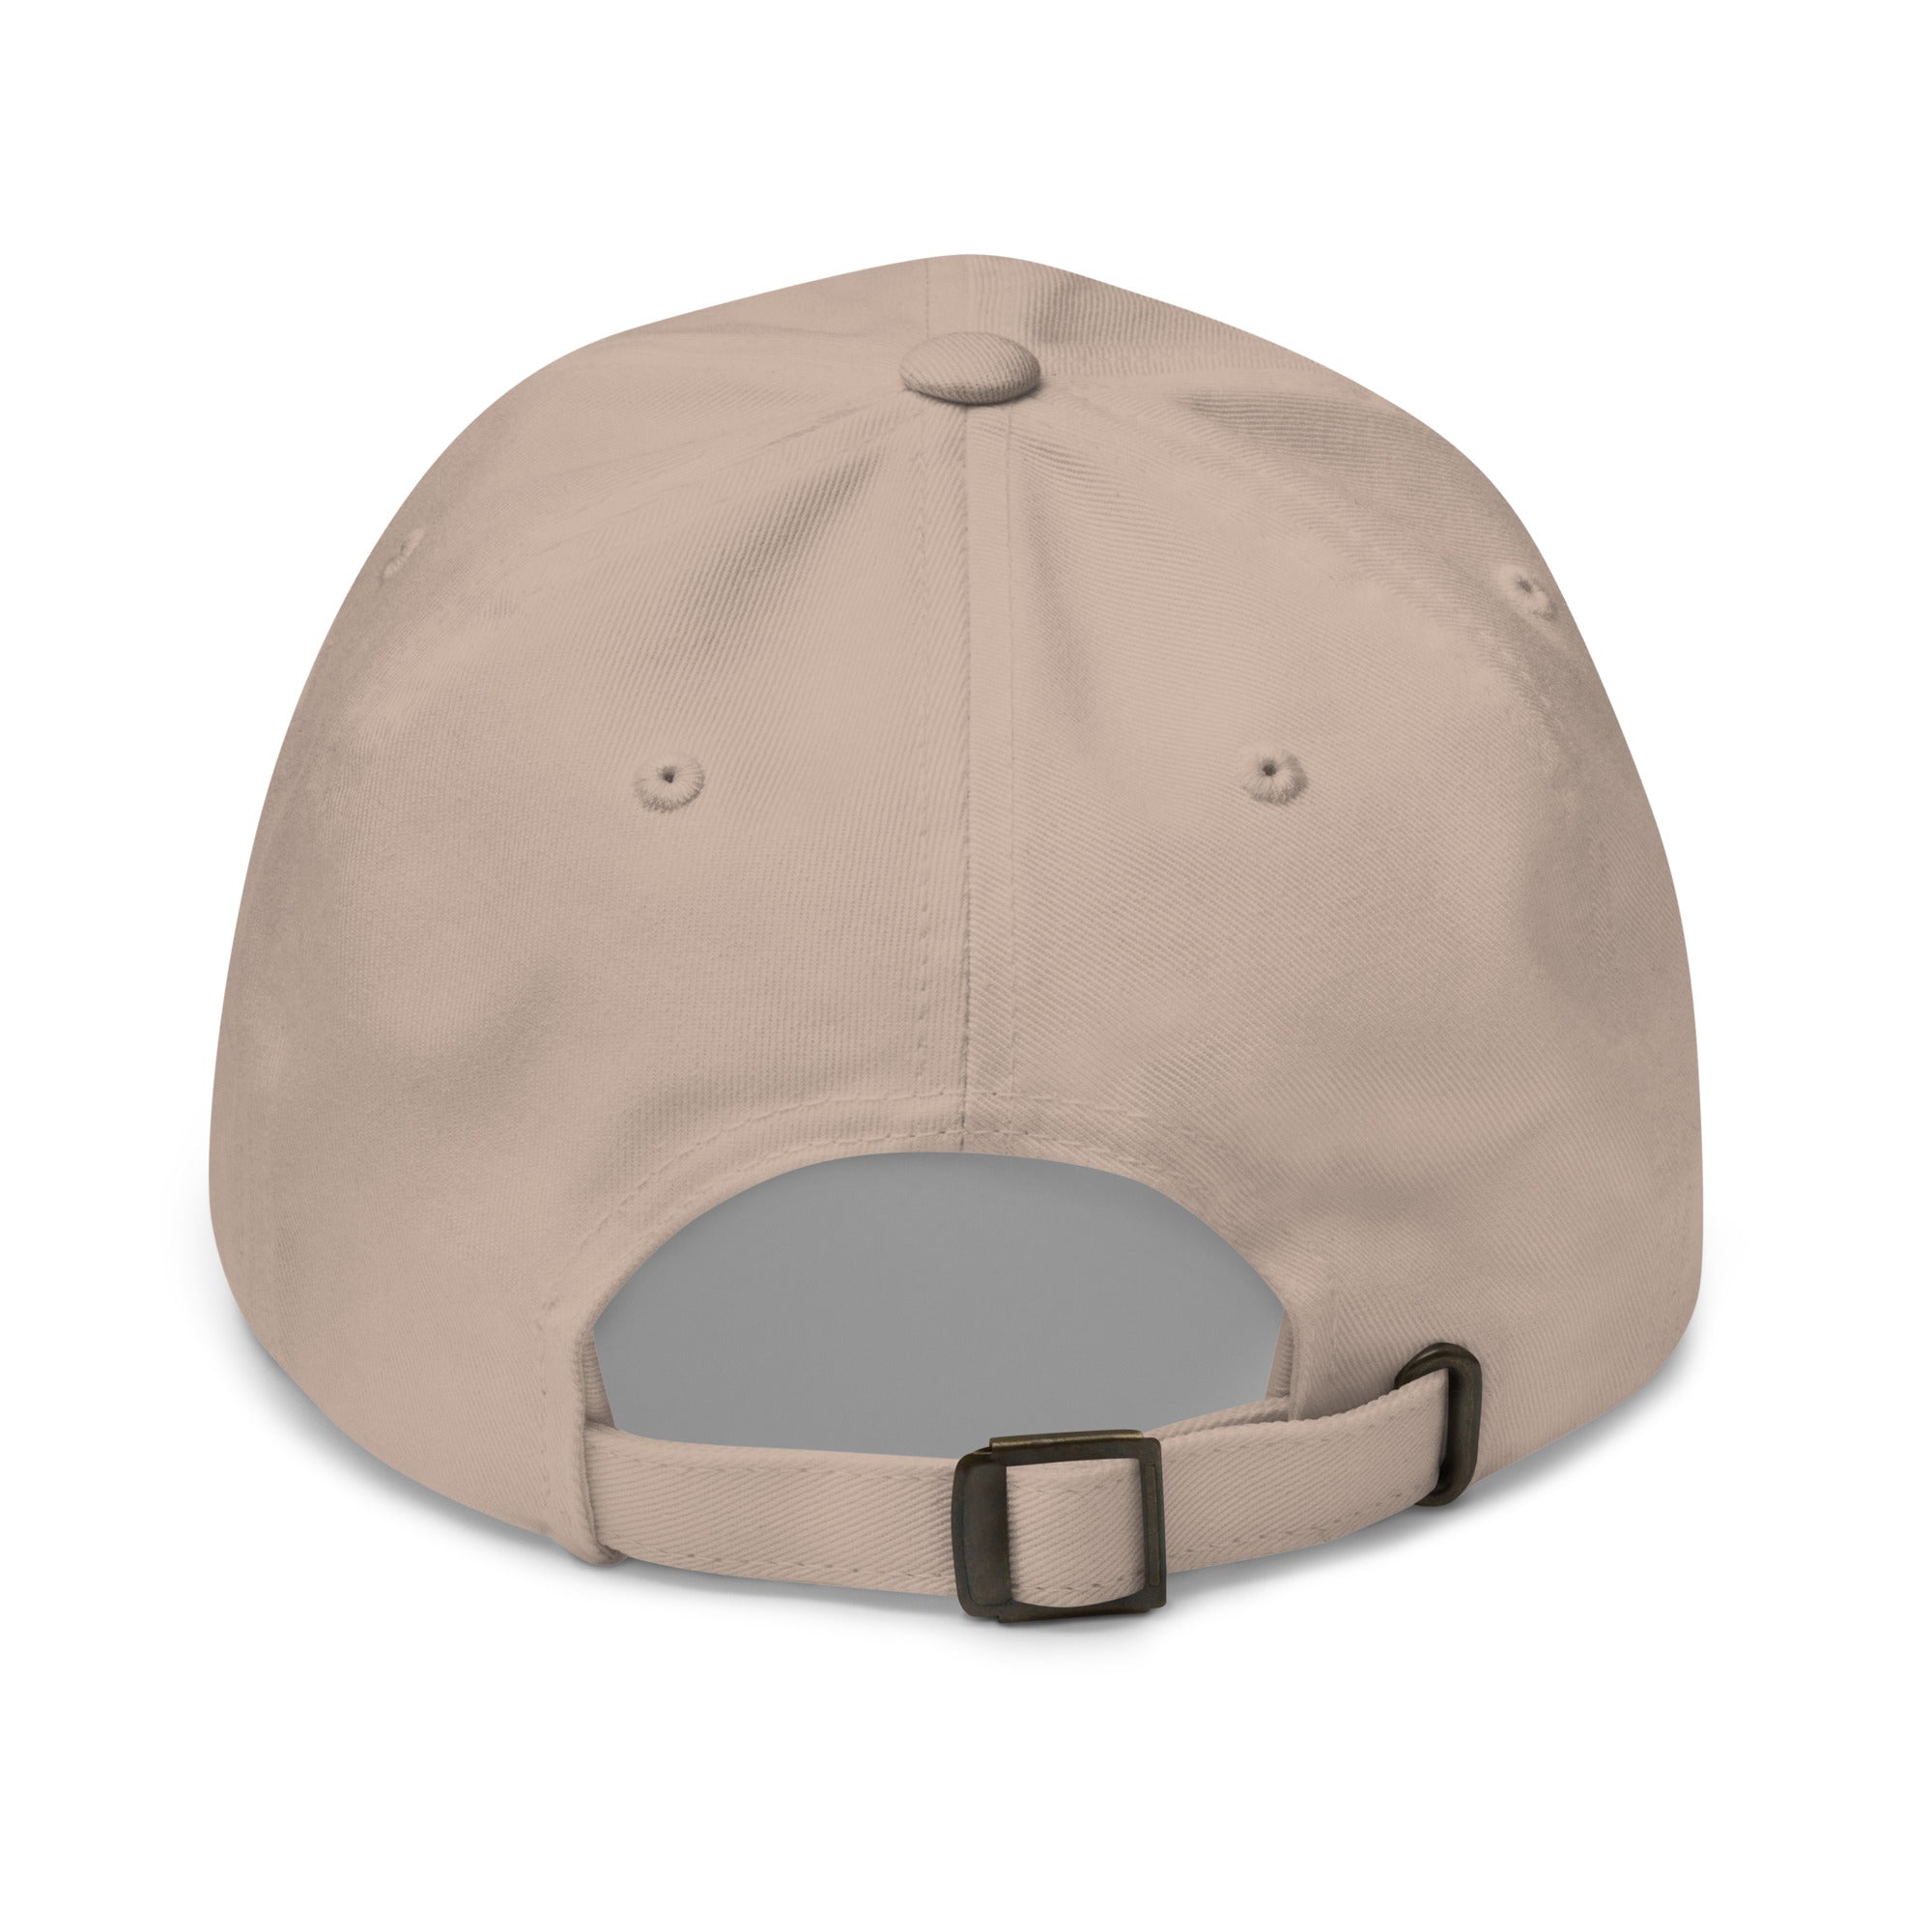 Clericot o'clock - Dad hat